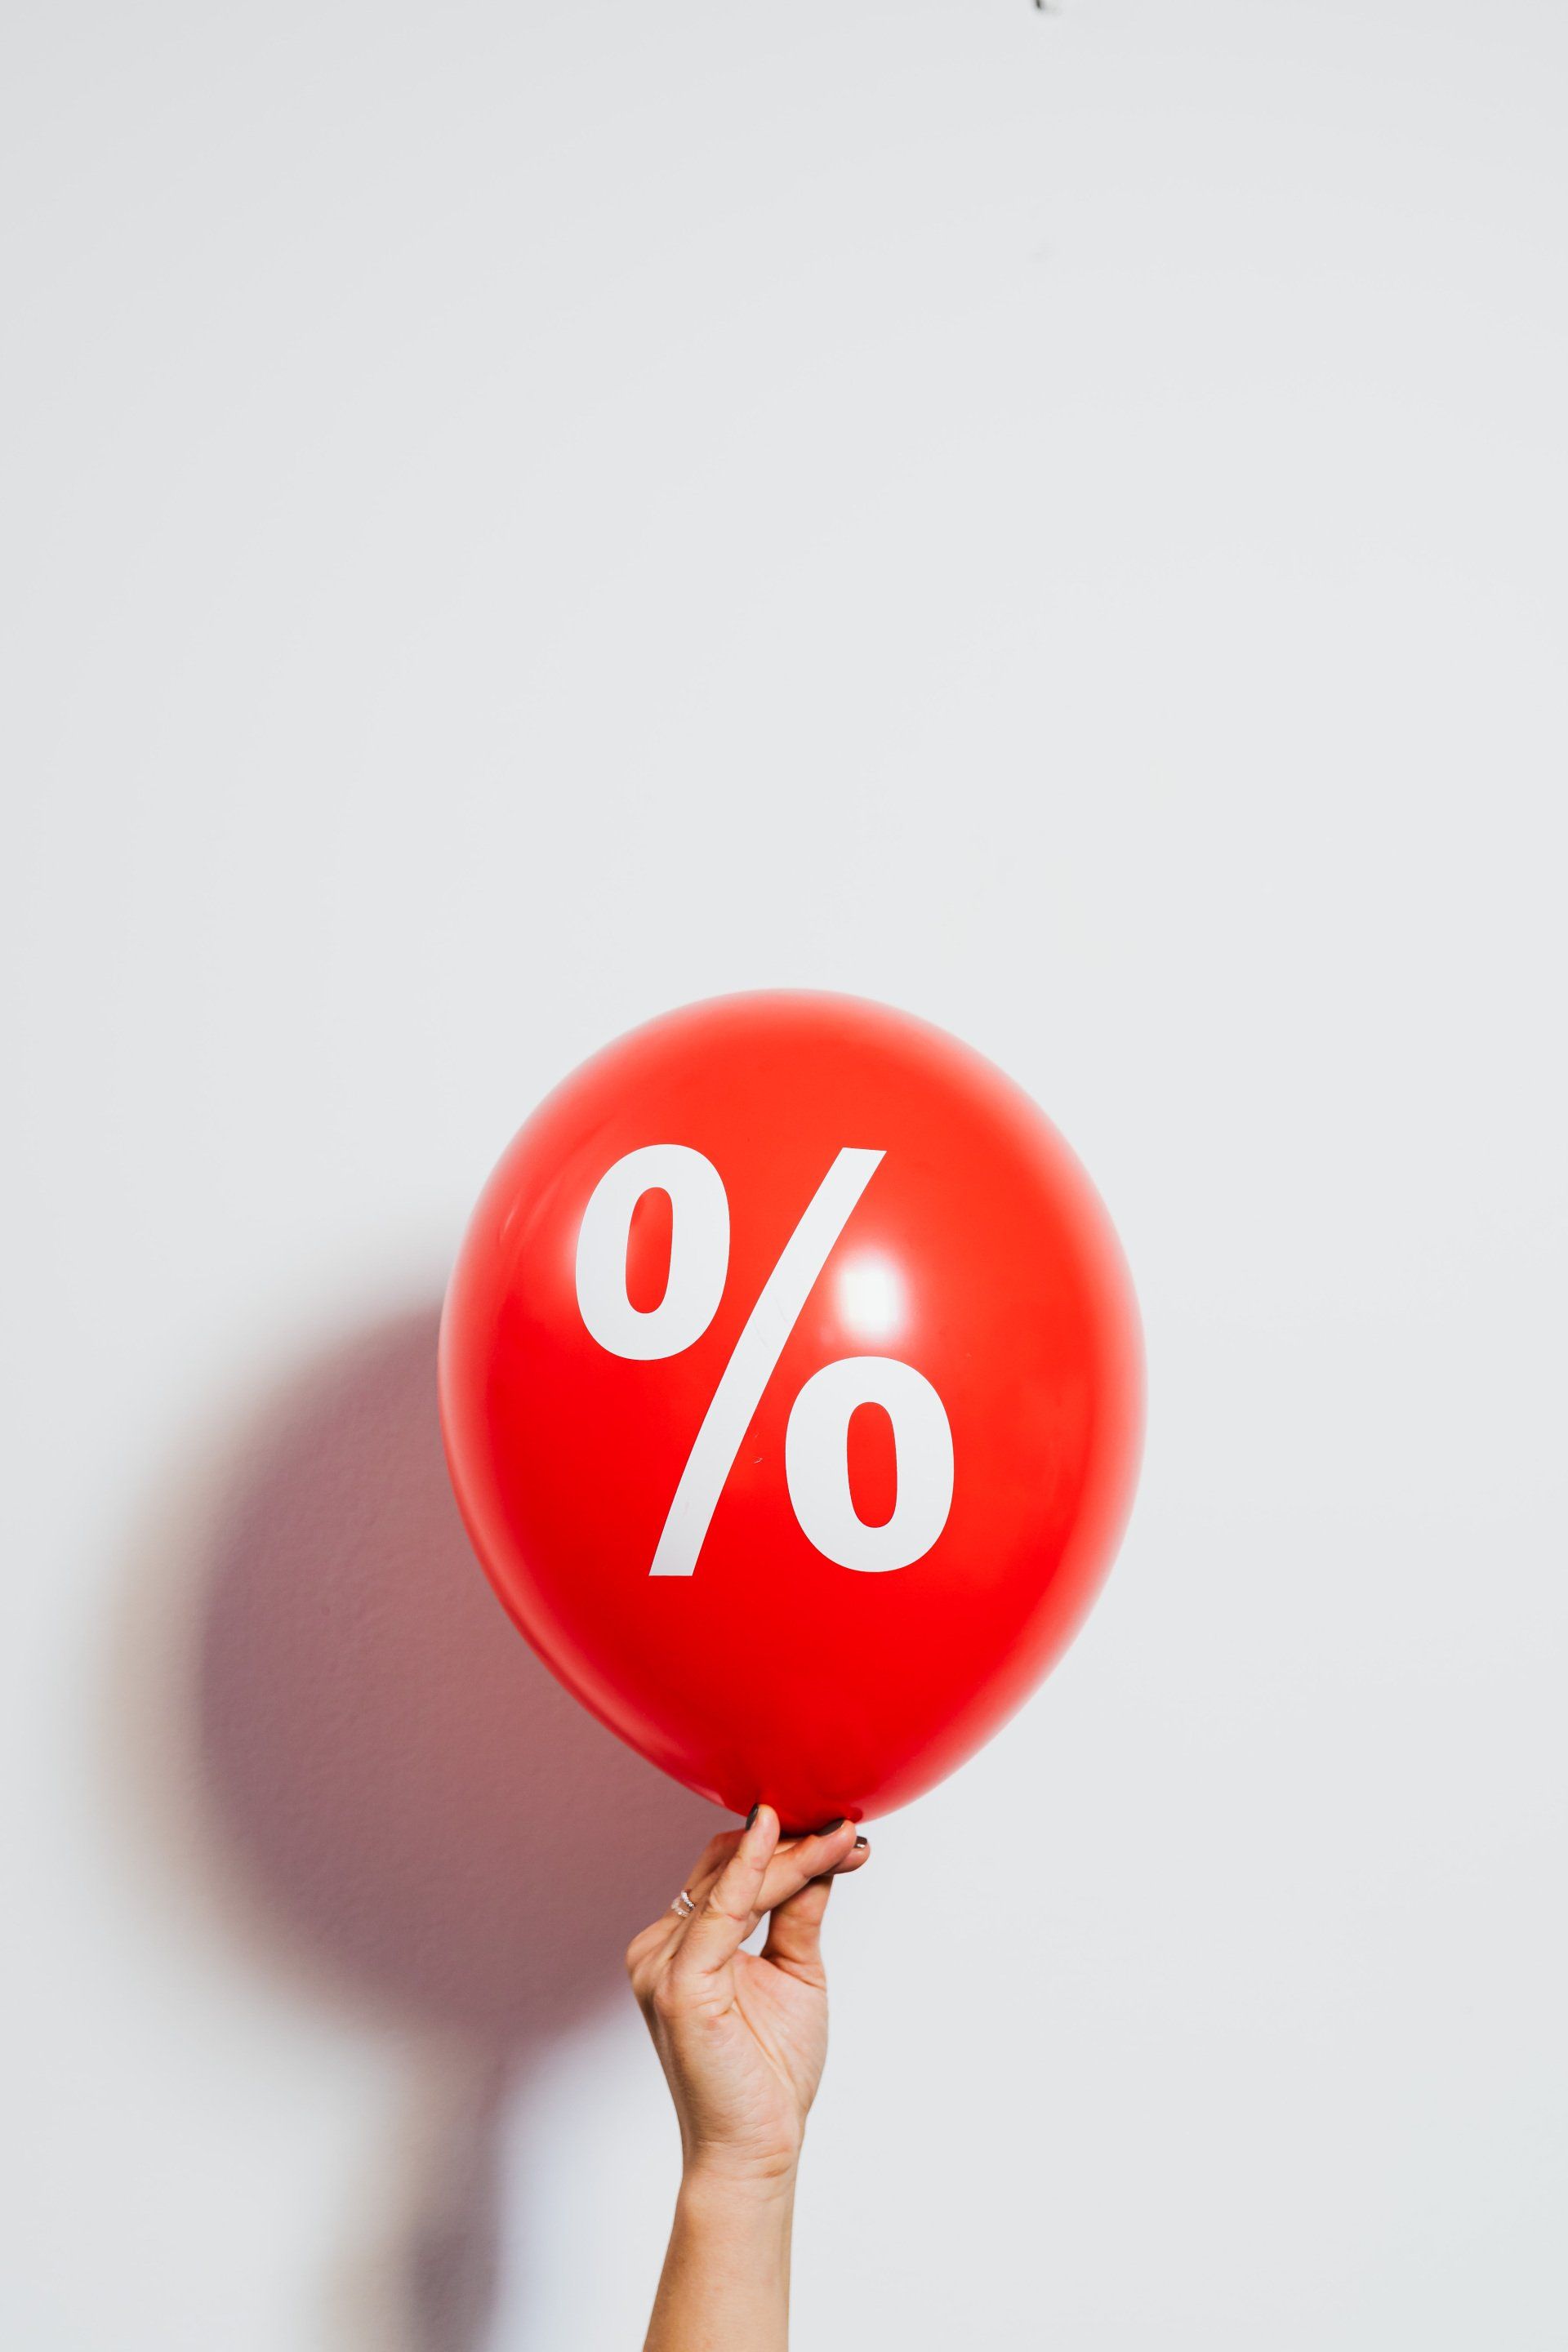 hand holding red balloon with percentage symbol in white against plain background